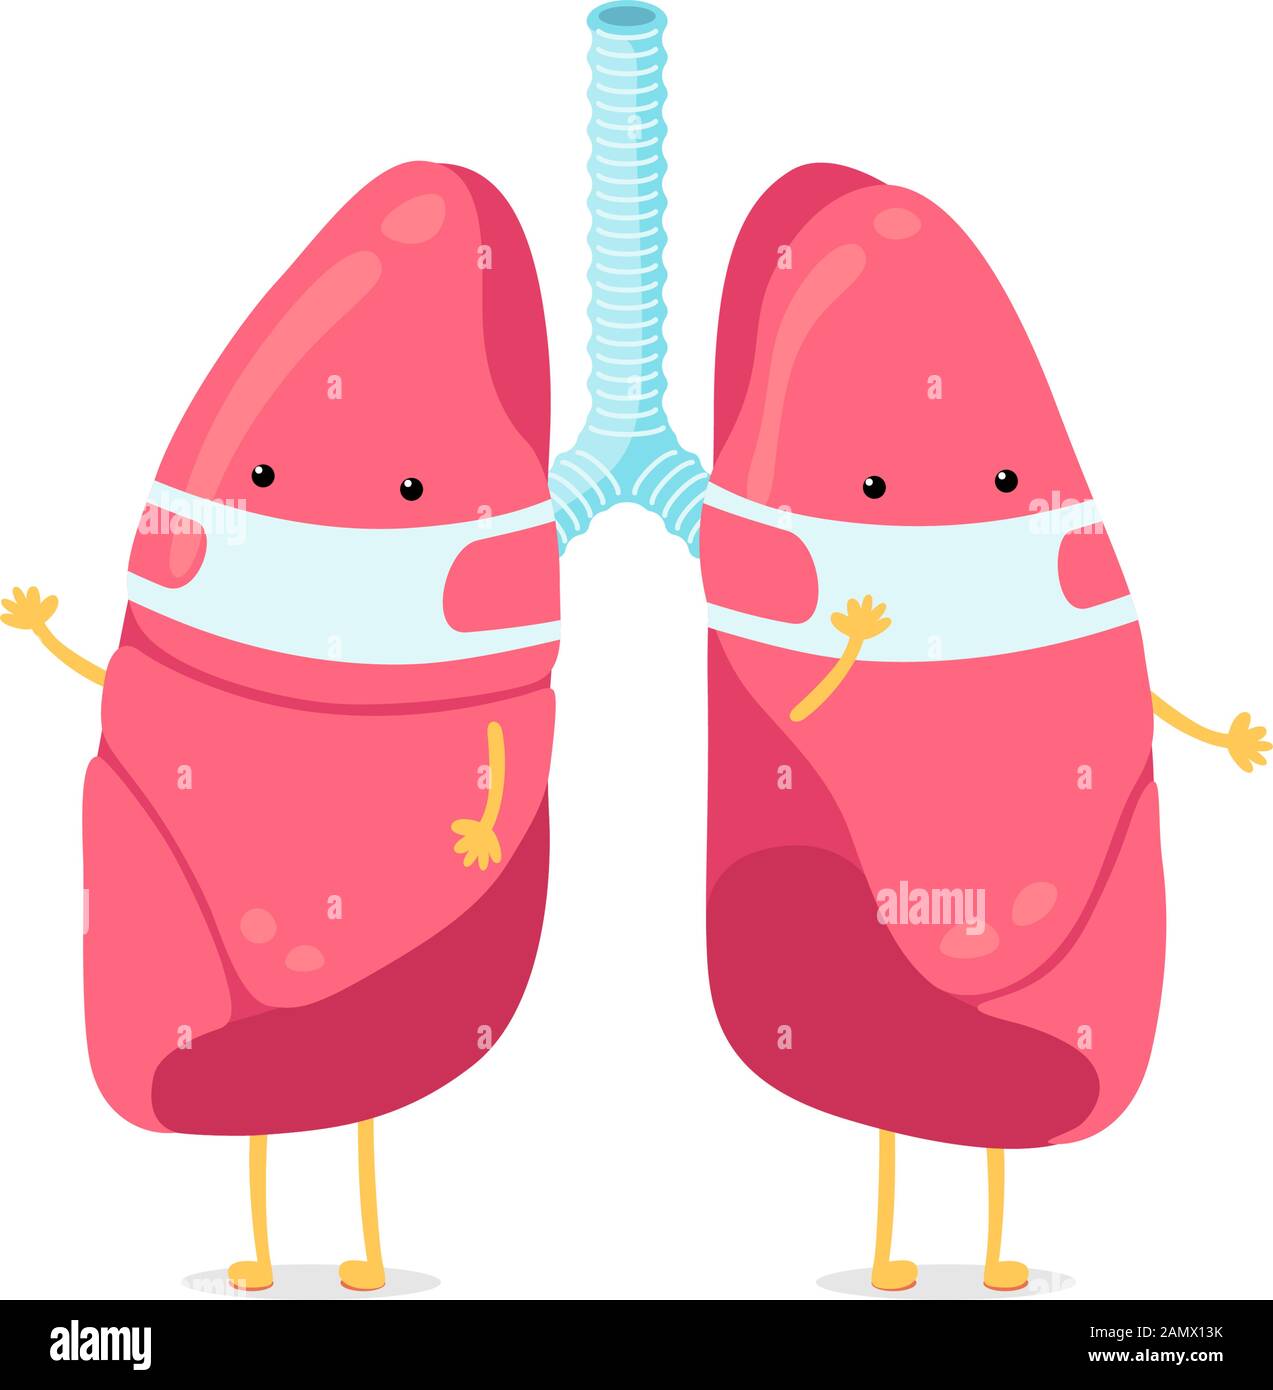 Cute cartoon lungs character with breathing hygiene mask on face. Human respiratory system lung internal organ mascot. Medical healthy anatomy air pollution protection vector illusrtation Stock Vector